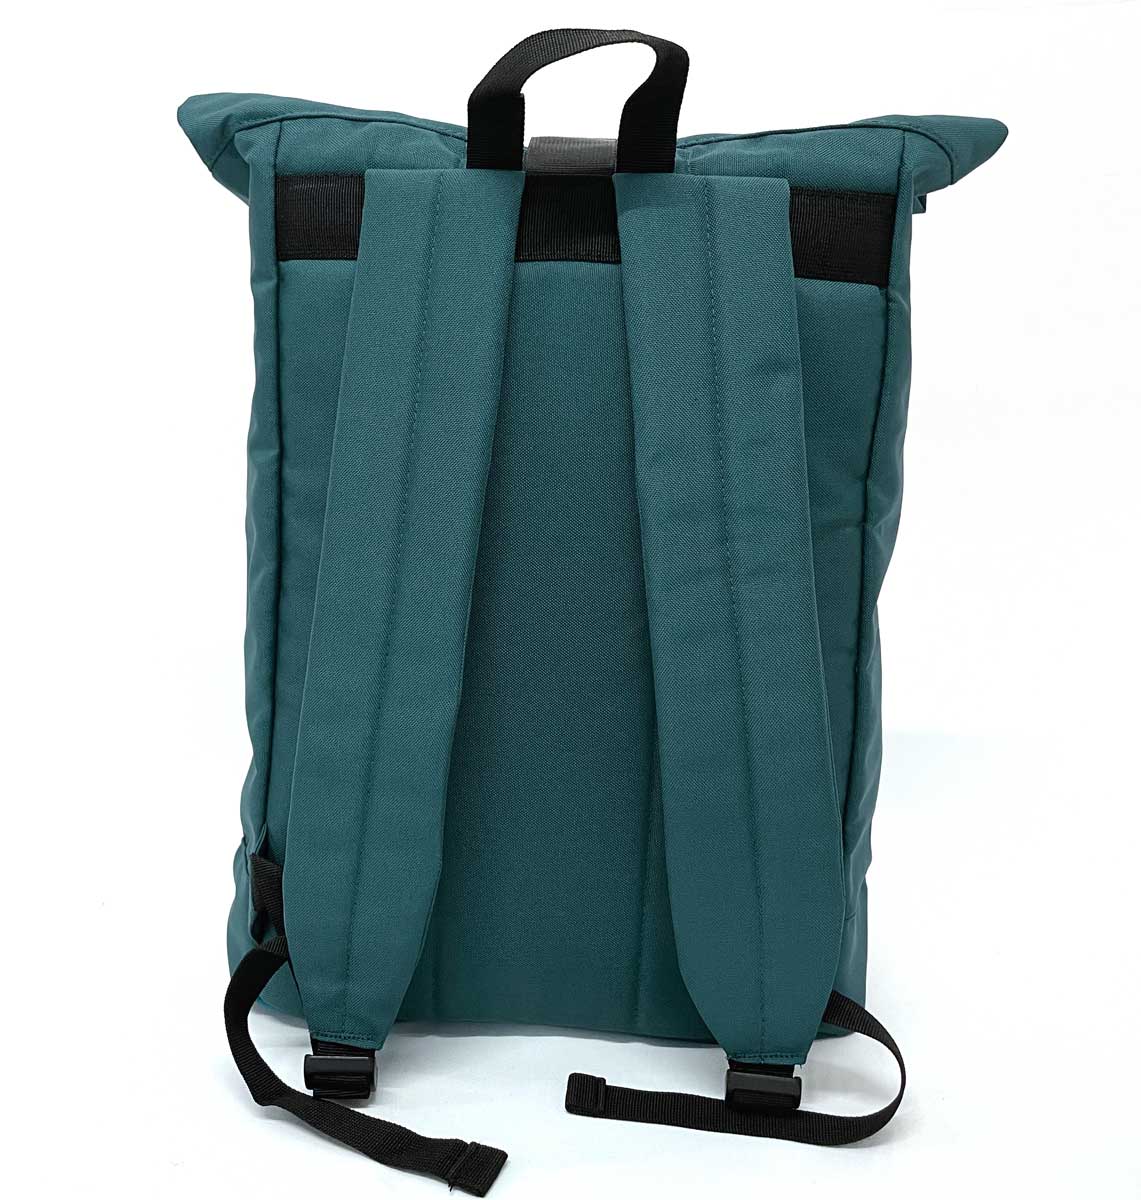 Coral Beach Roll-top Recycled Backpack - Blue Panda